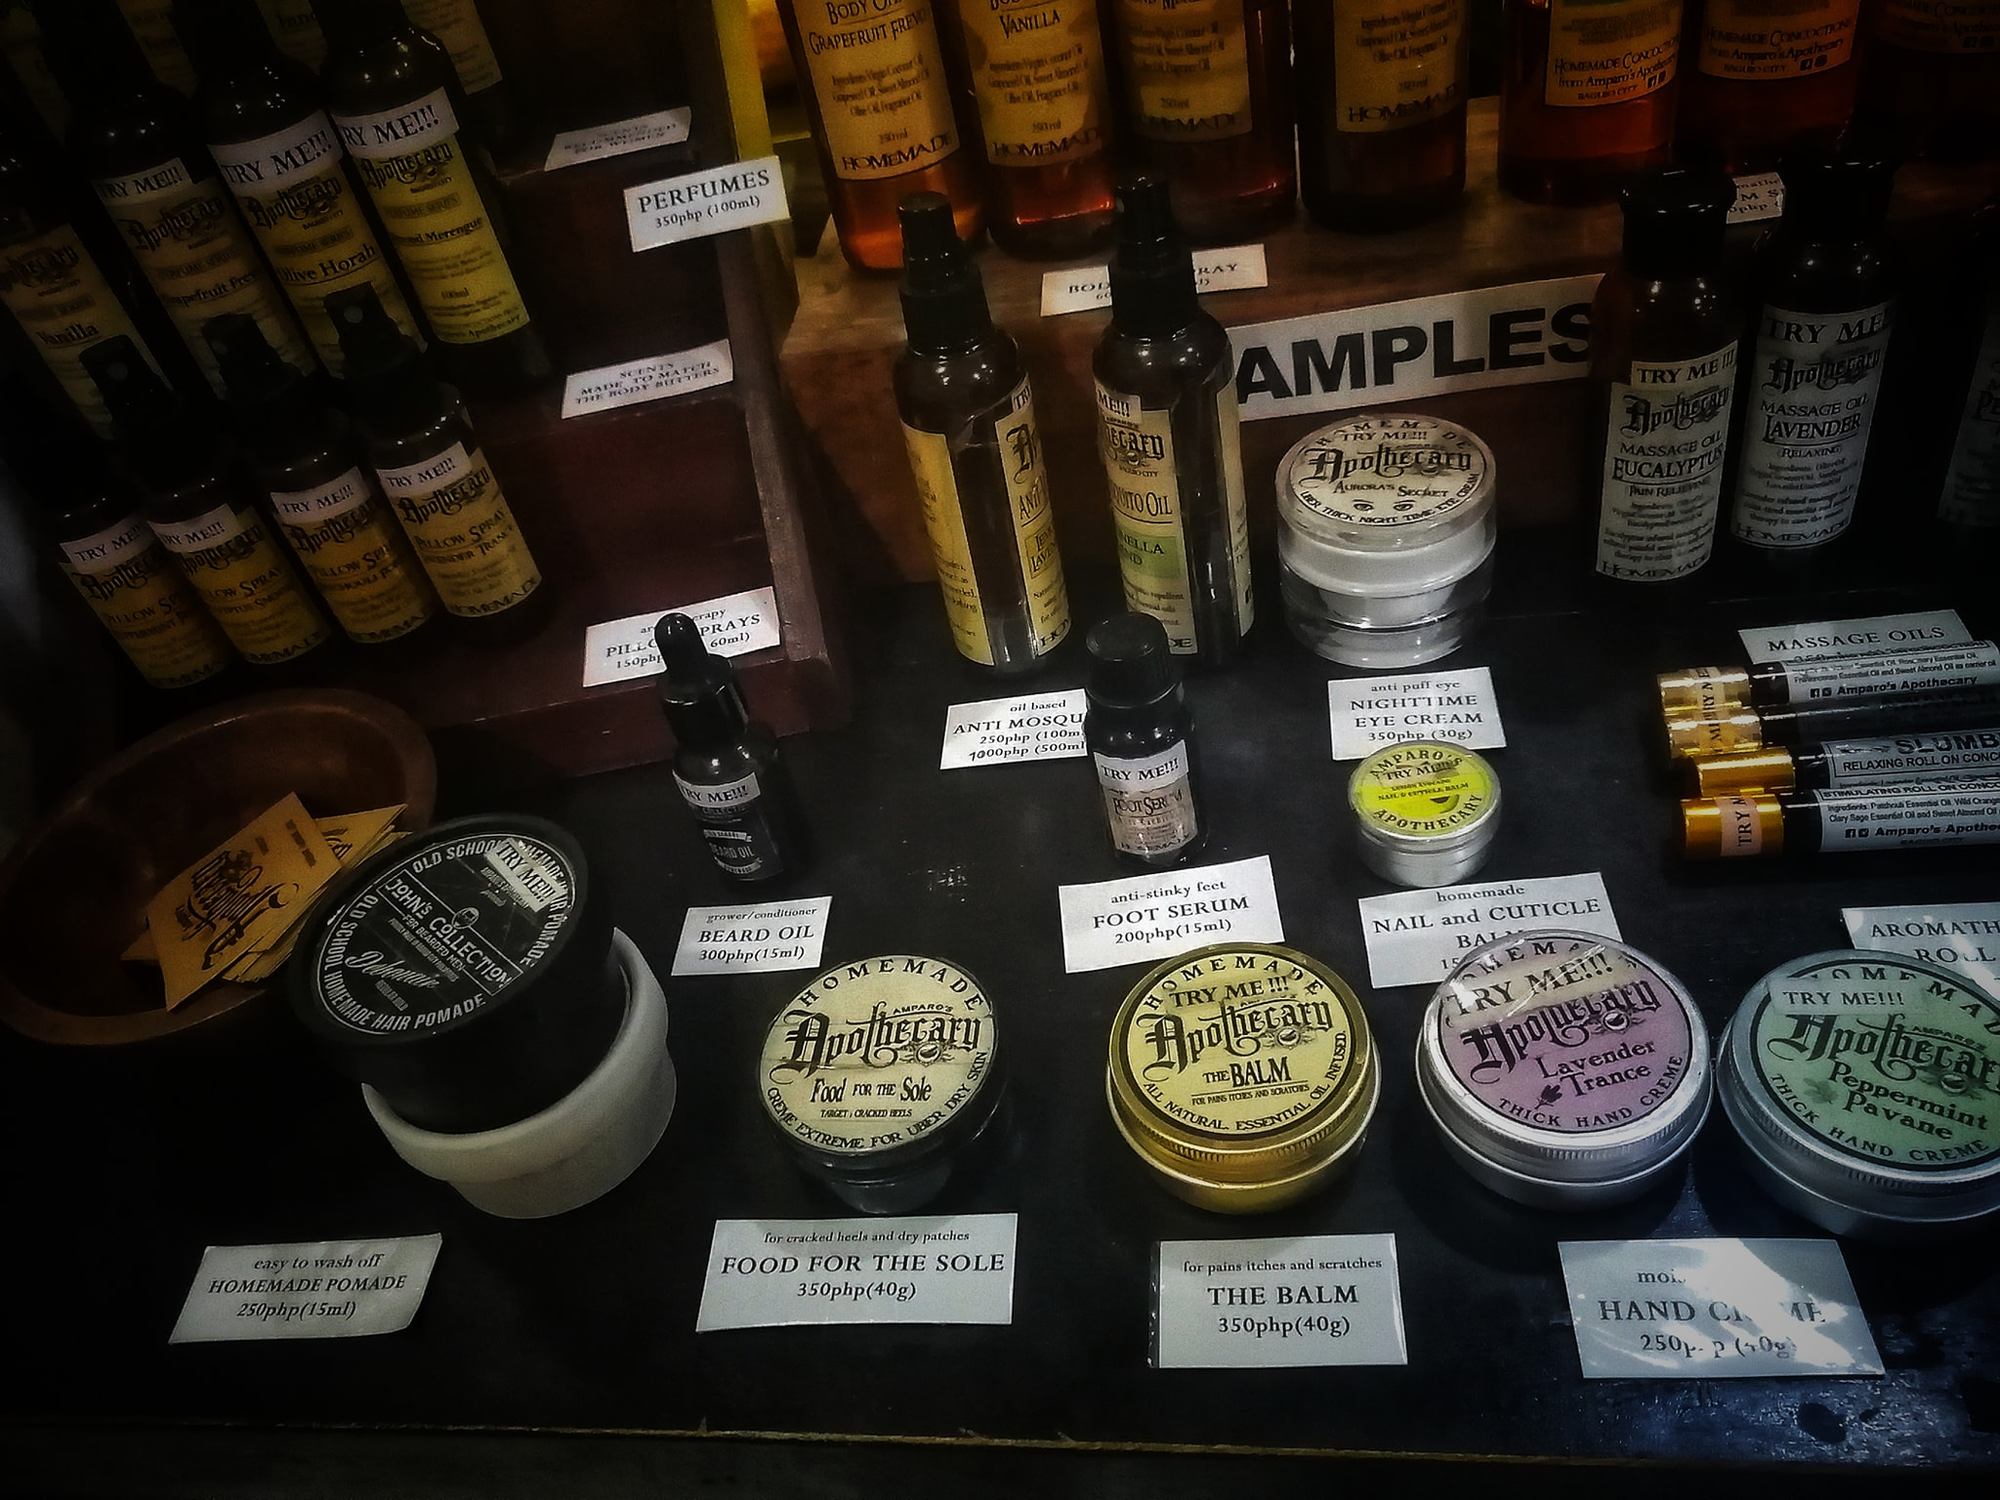 Here are different products they offer that one can sample.